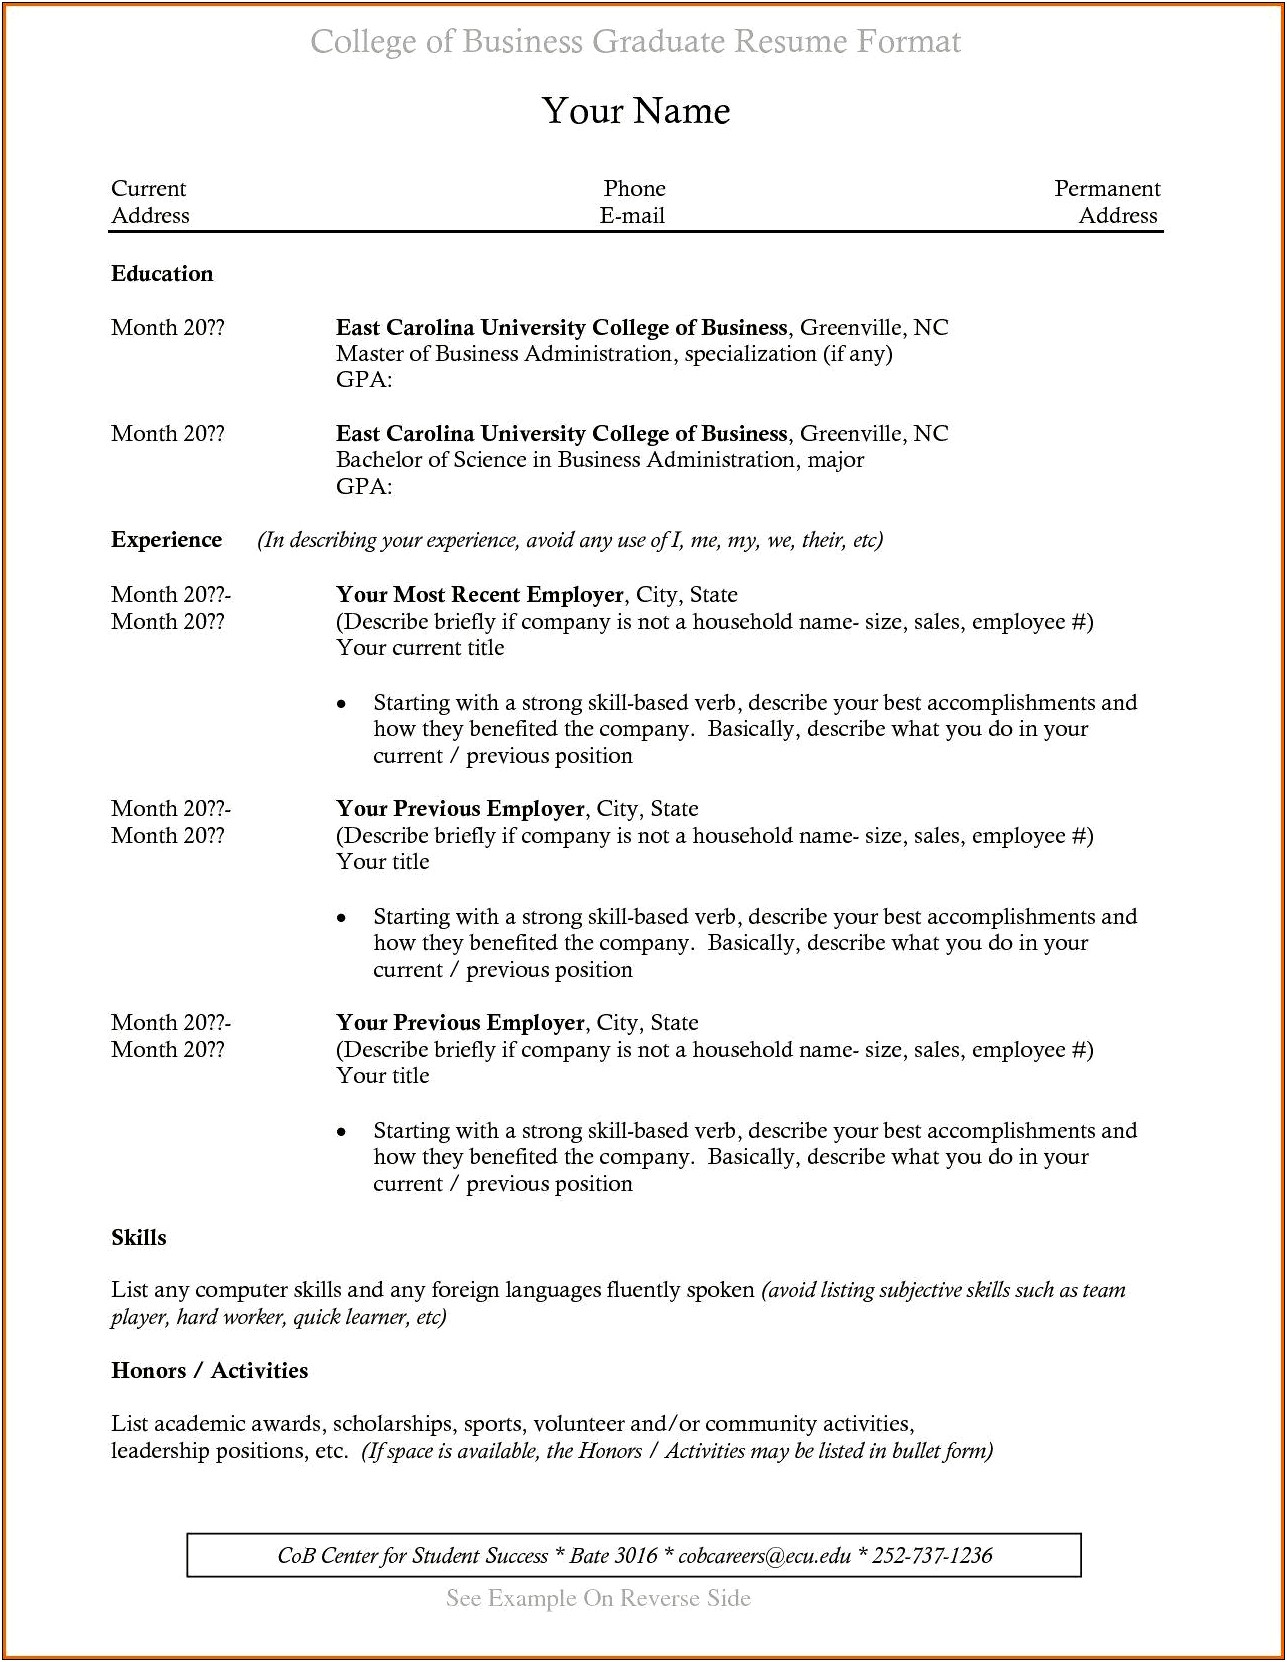 Sample Of Education Section On Post Graduate Resume